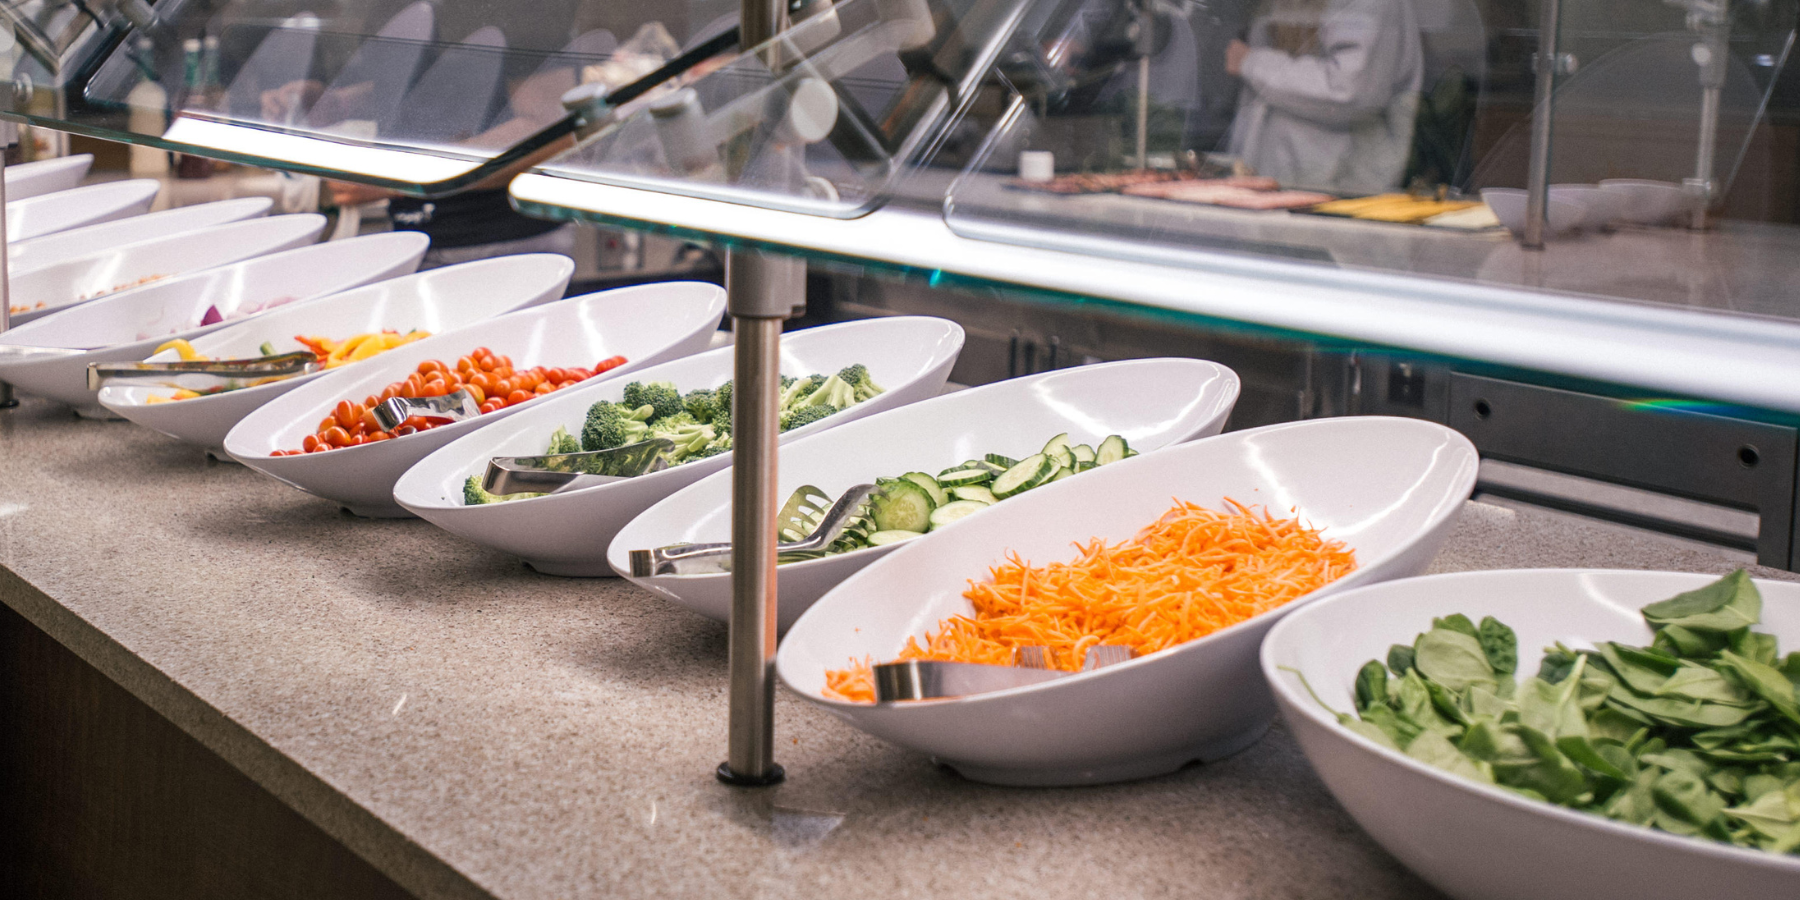 Photo of a salad bar at the Lodge using vegetables from the UCCS Farm.